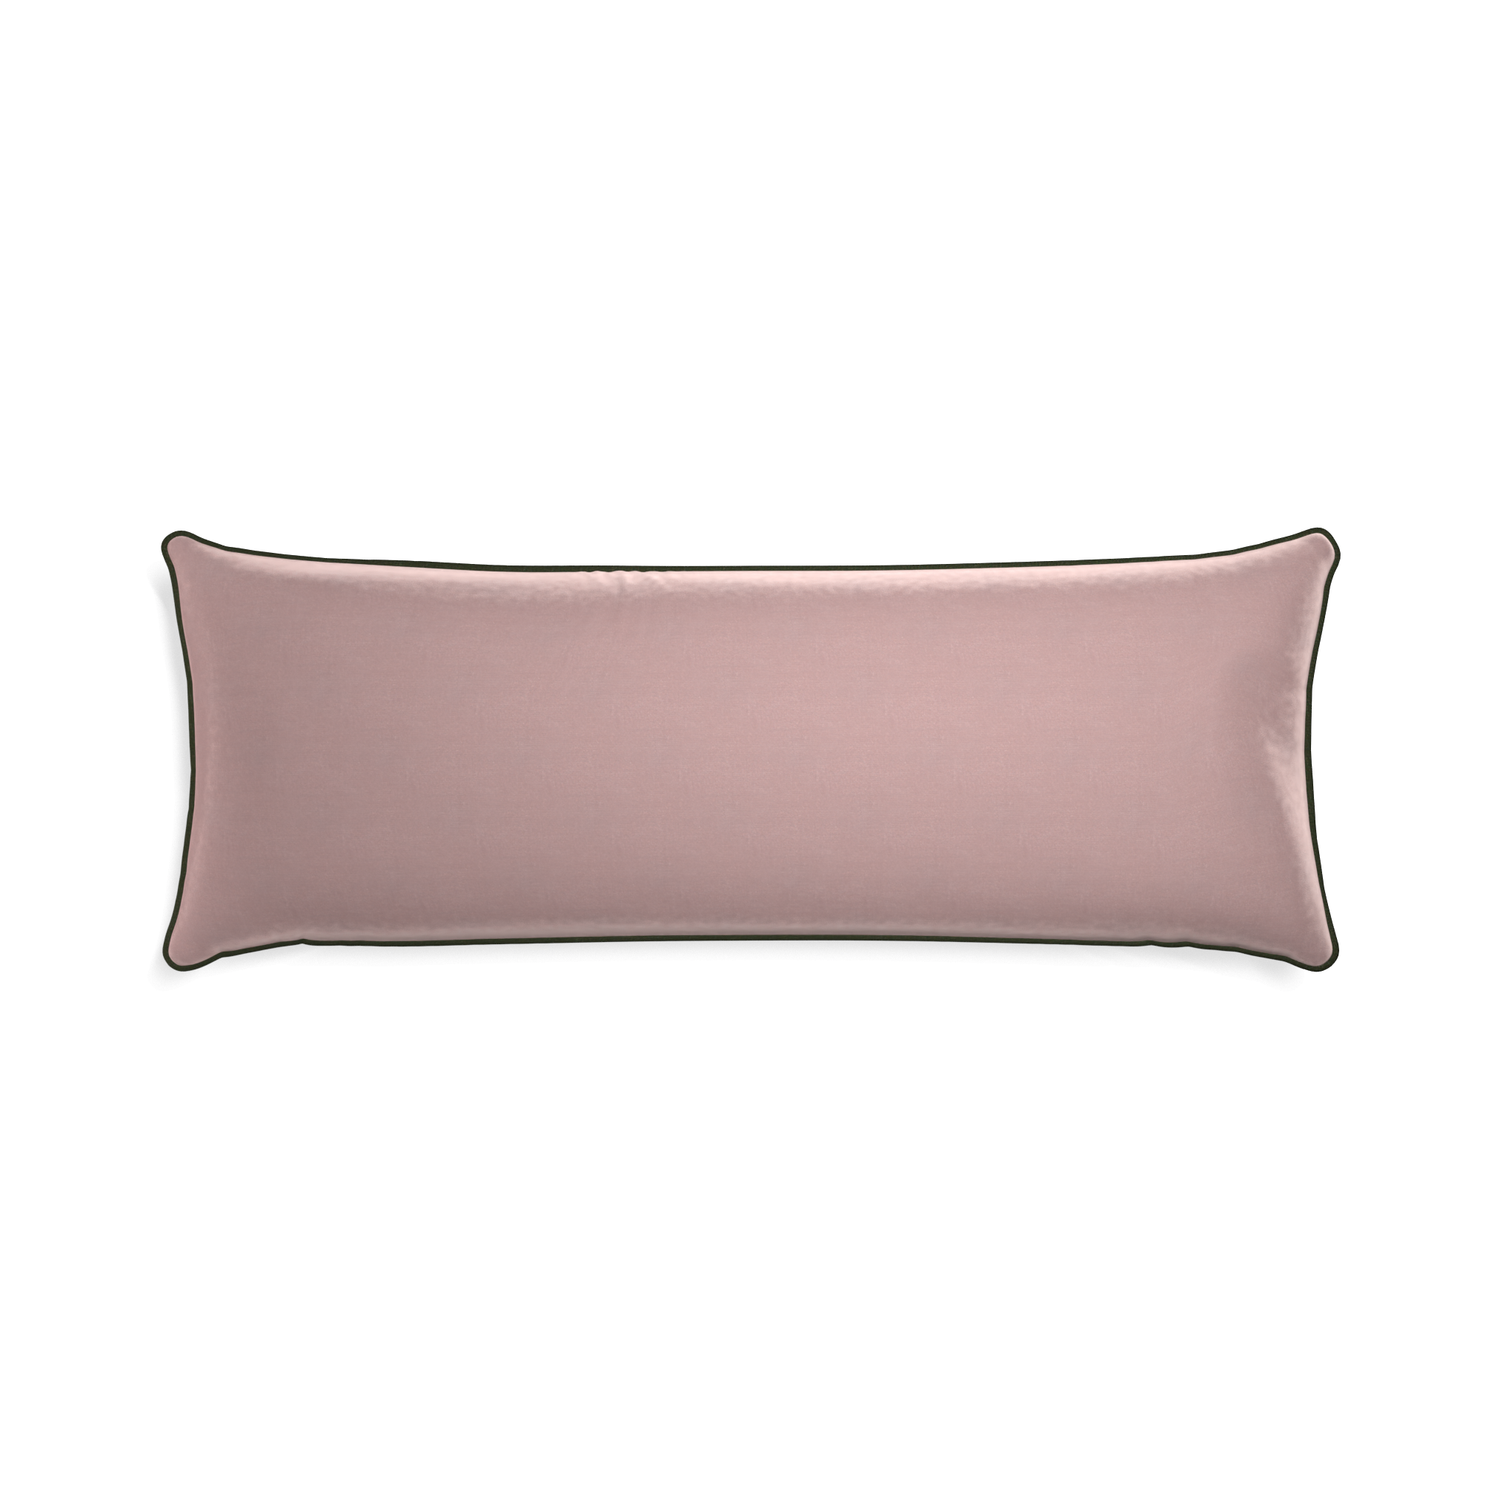 Xl-lumbar mauve velvet custom pillow with f piping on white background